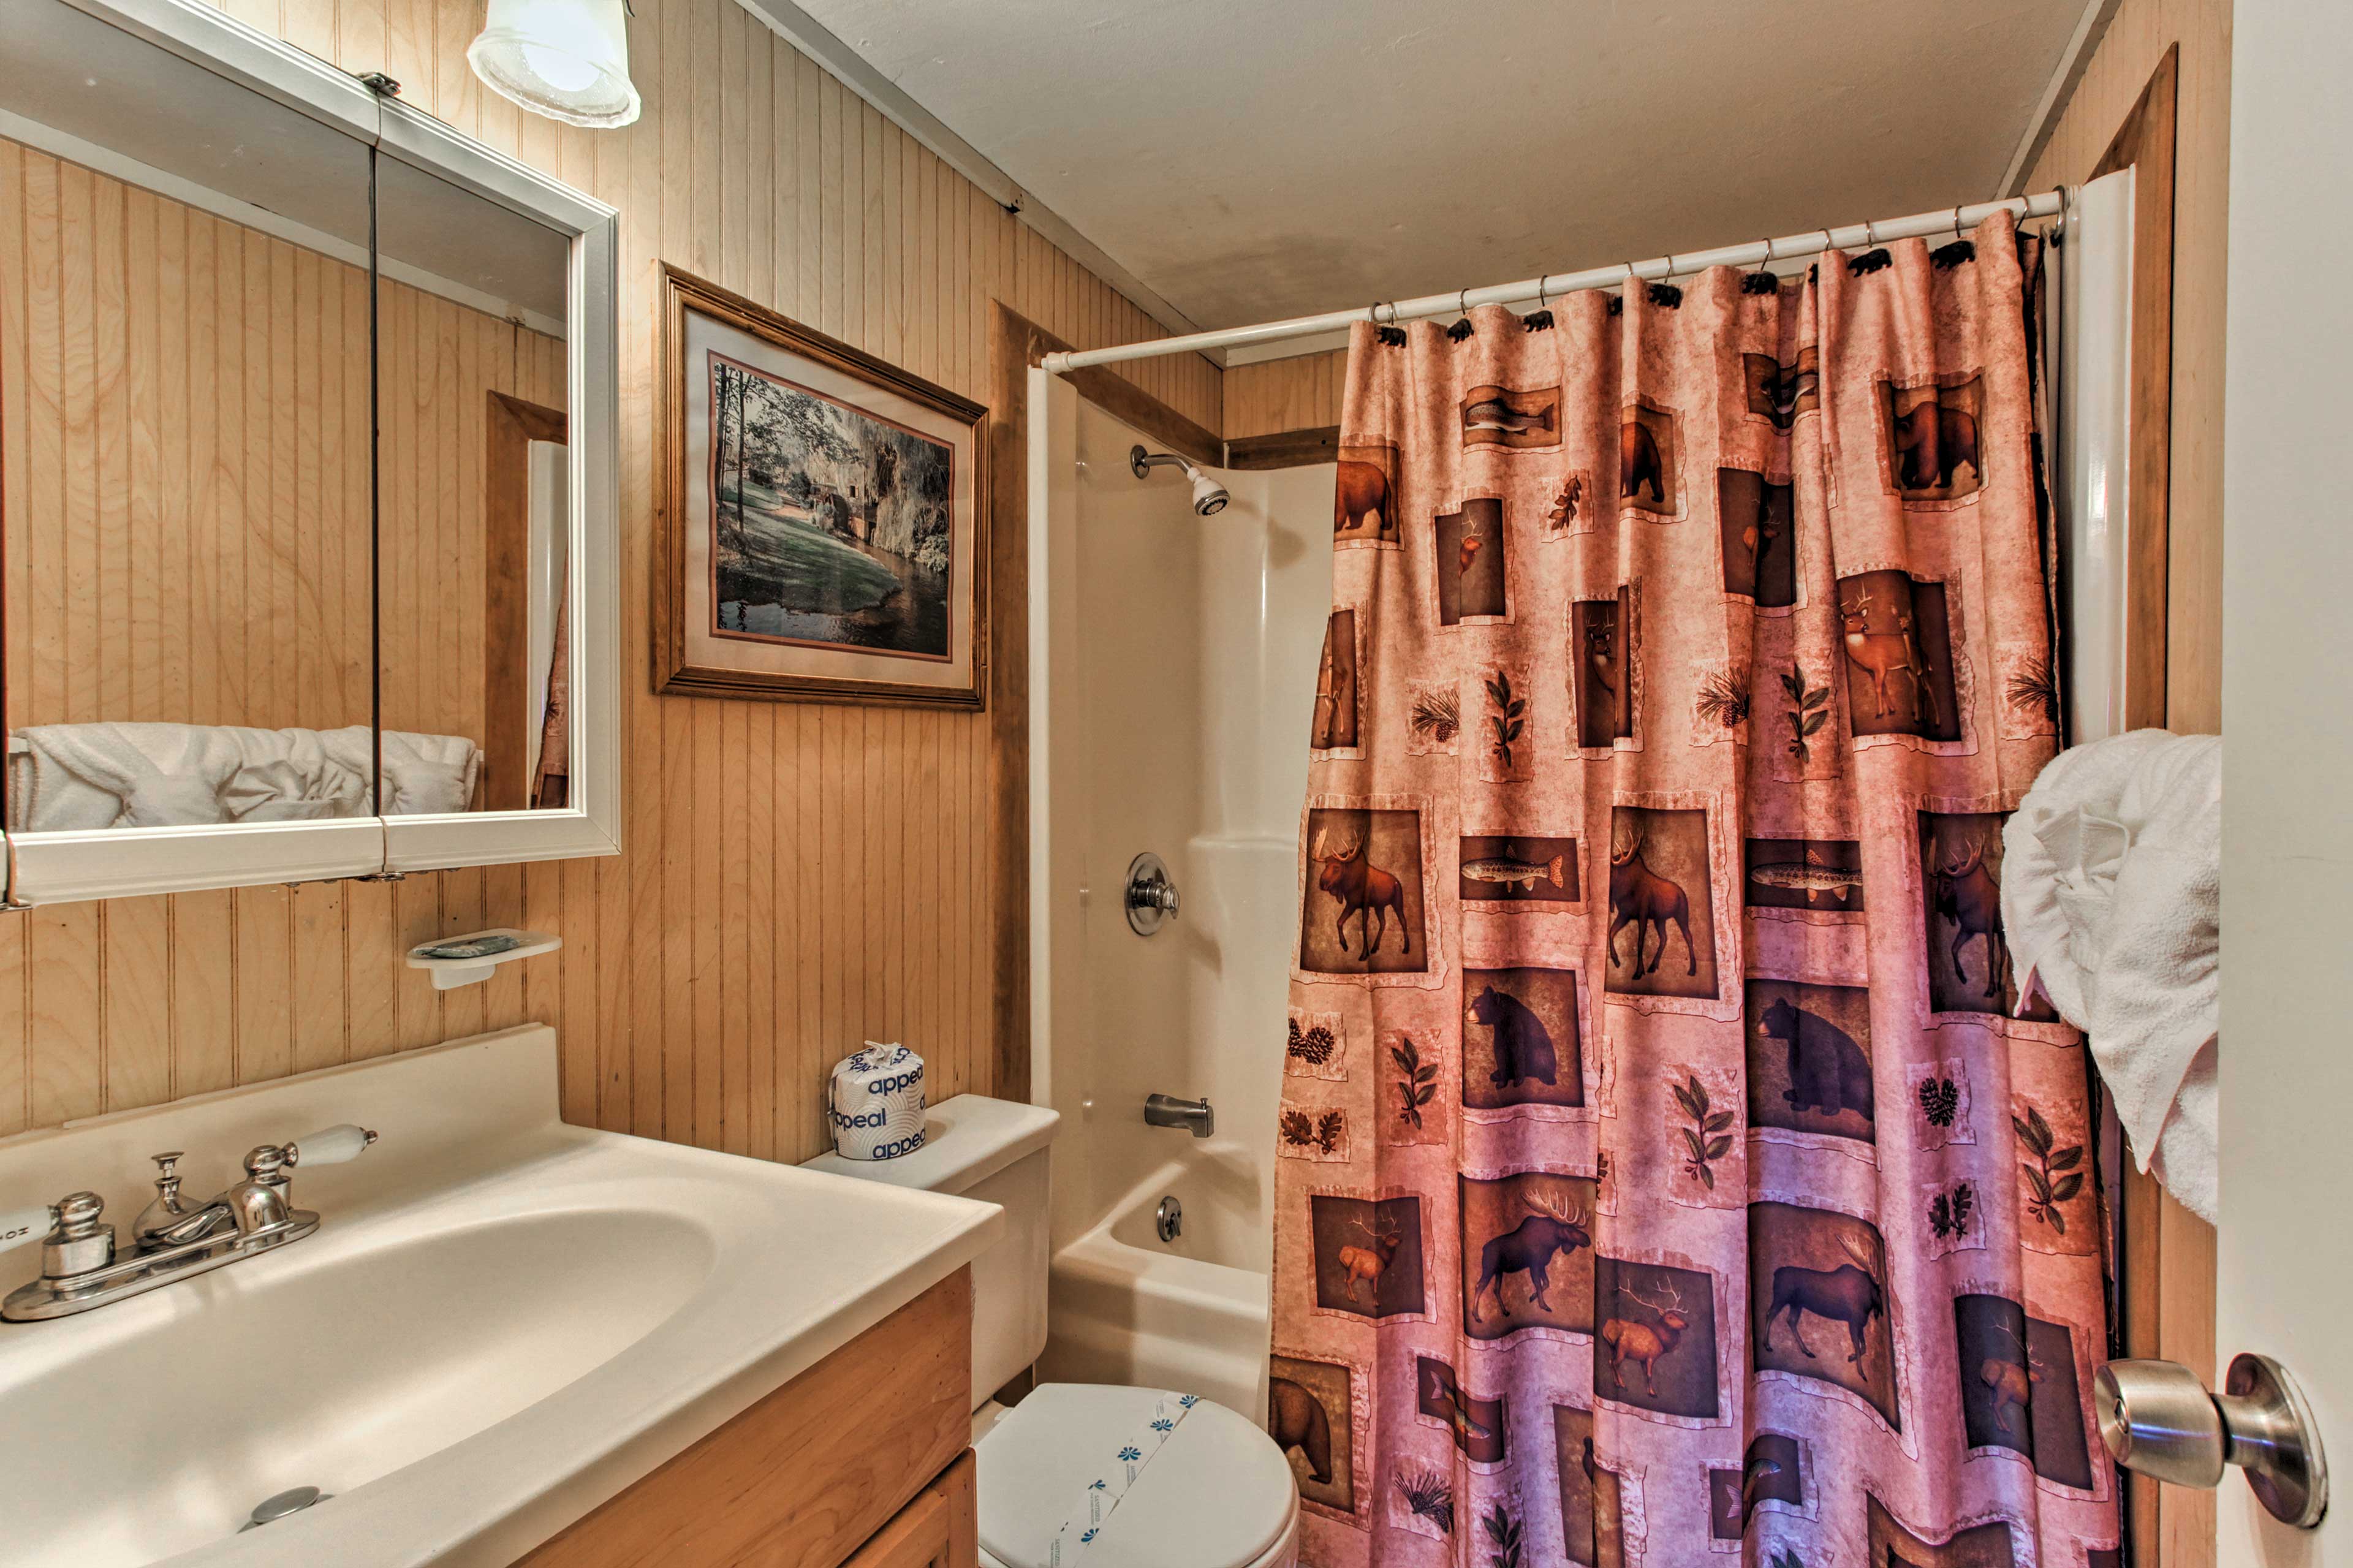 Another shower/tub combo can be found in the second full bathroom.